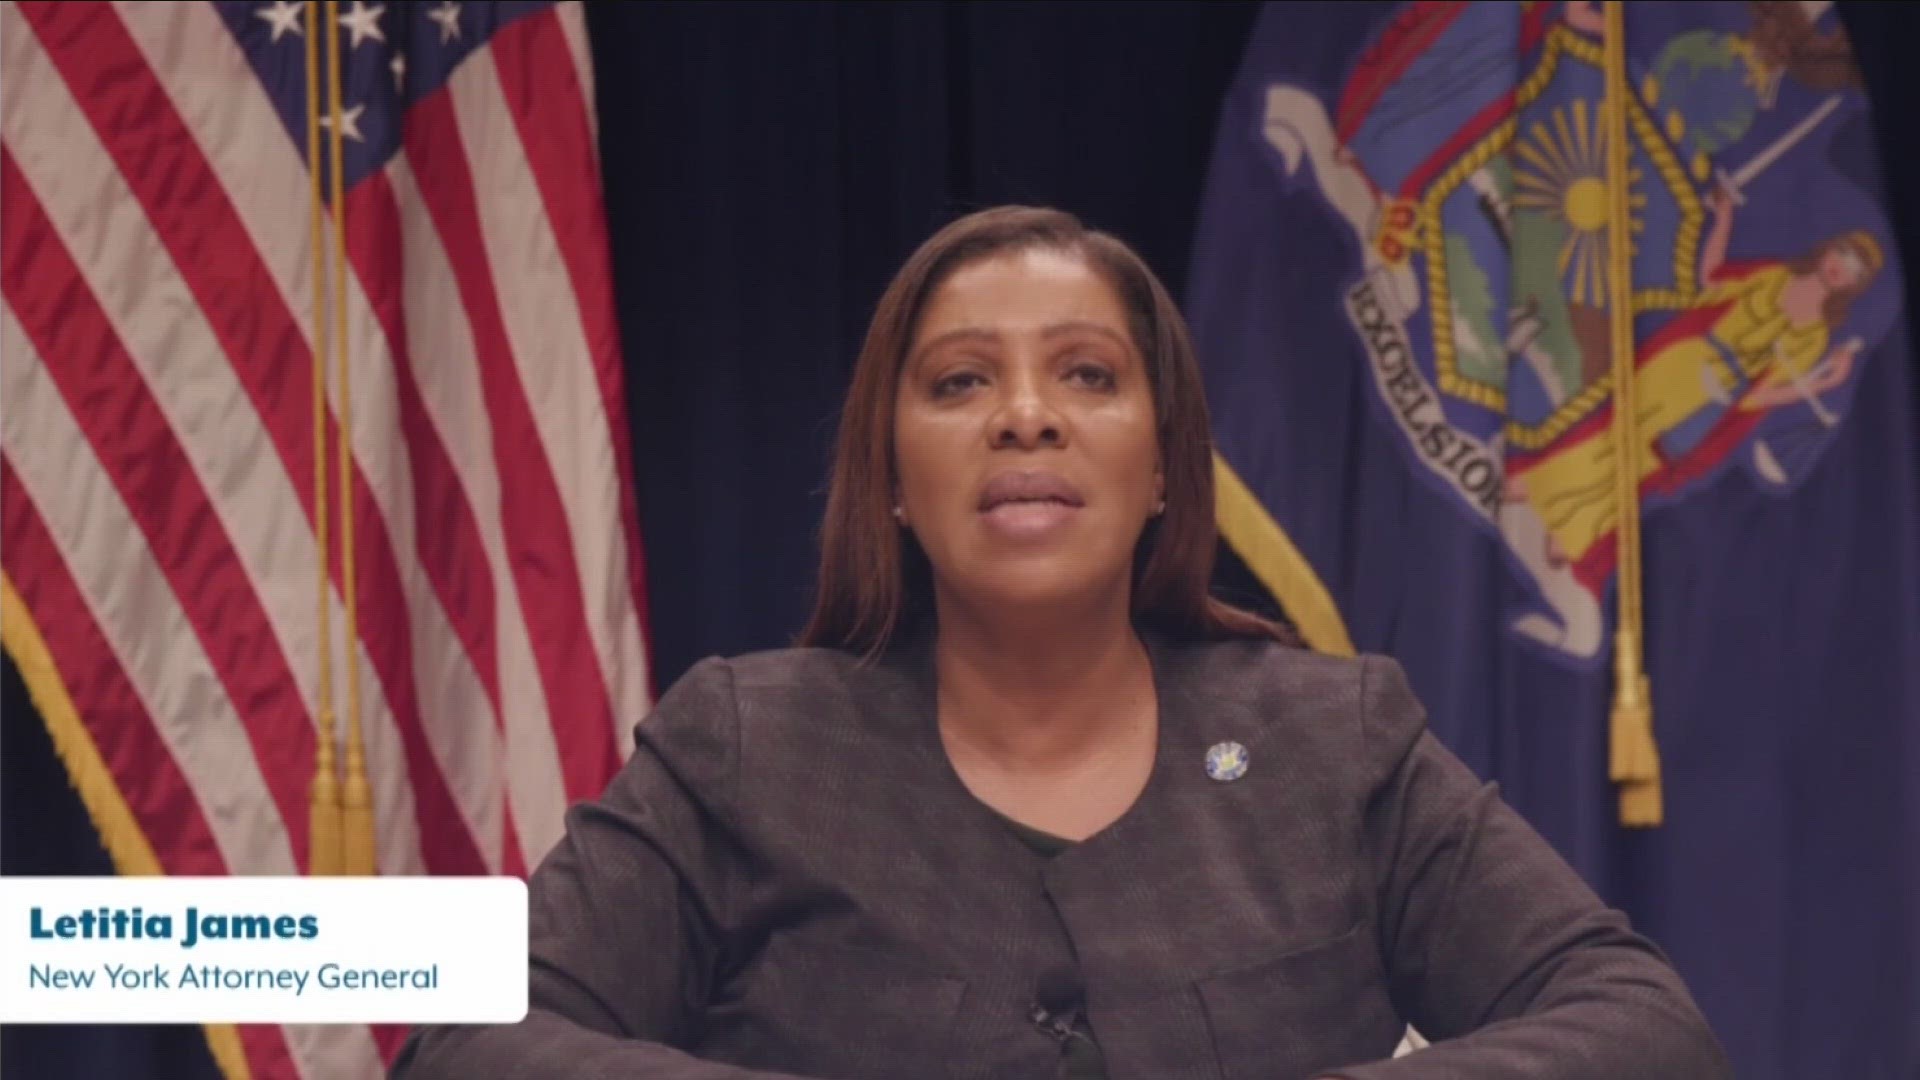 NEW YORK STATE ATTORNEY GENERAL LETITIA JAMES will be in BUFFALO THIS MORNING TO MAKE WHAT HER OFFICE CALLS A HISTORIC ANNOUNCEMENT about ENVIRONMENTAL Protection